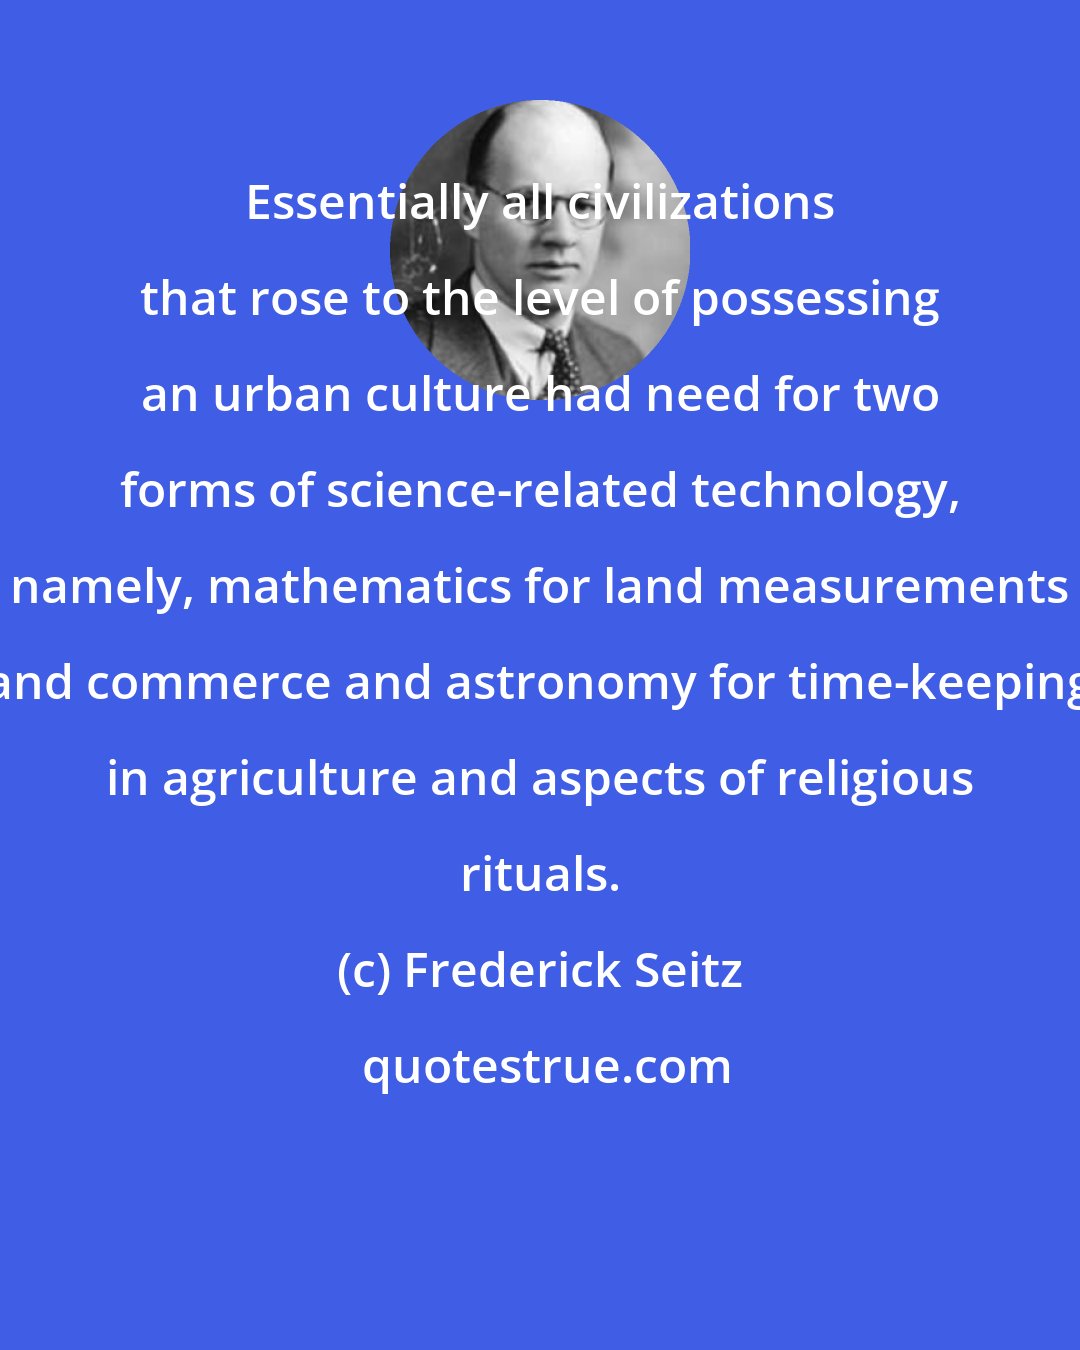 Frederick Seitz: Essentially all civilizations that rose to the level of possessing an urban culture had need for two forms of science-related technology, namely, mathematics for land measurements and commerce and astronomy for time-keeping in agriculture and aspects of religious rituals.